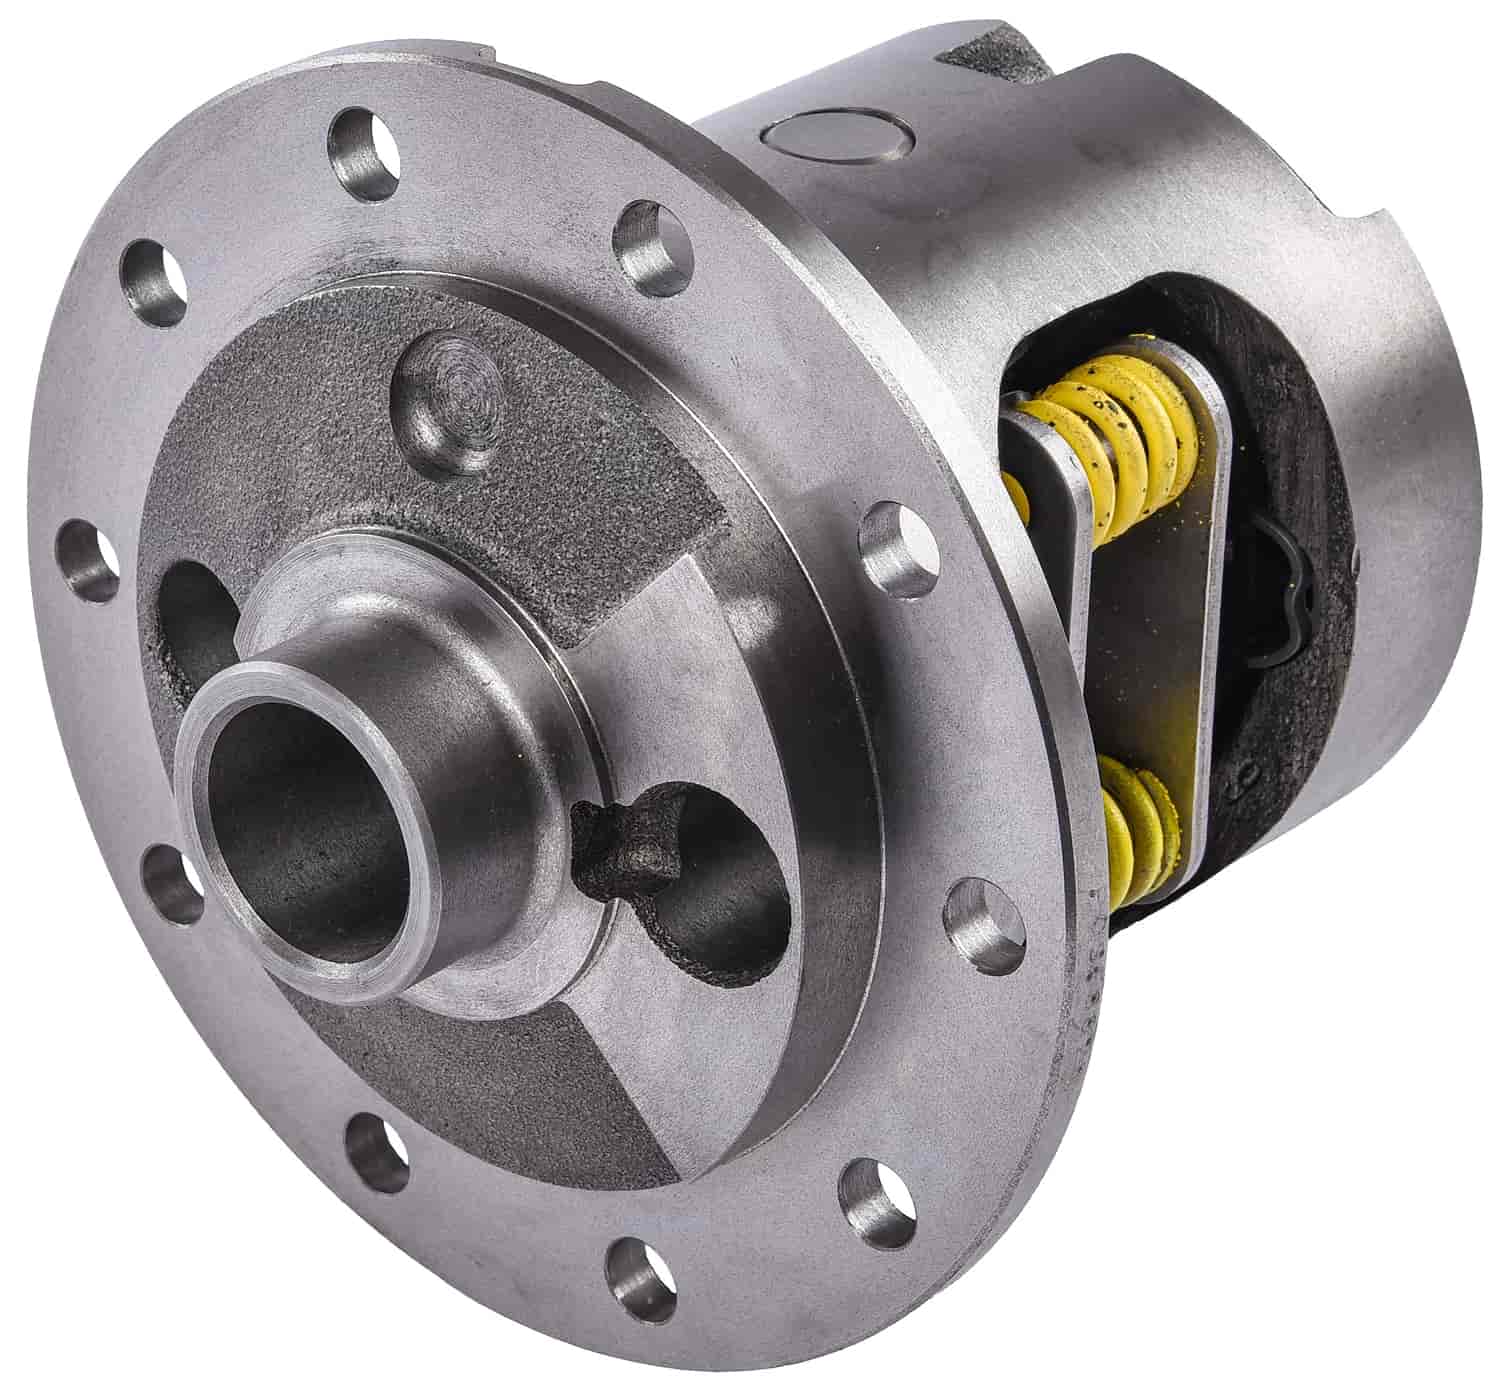 Posi Traction Differential for Ford Cars/Trucks Rear, Ford 8.8 in. 28-Spline [All Ratios]